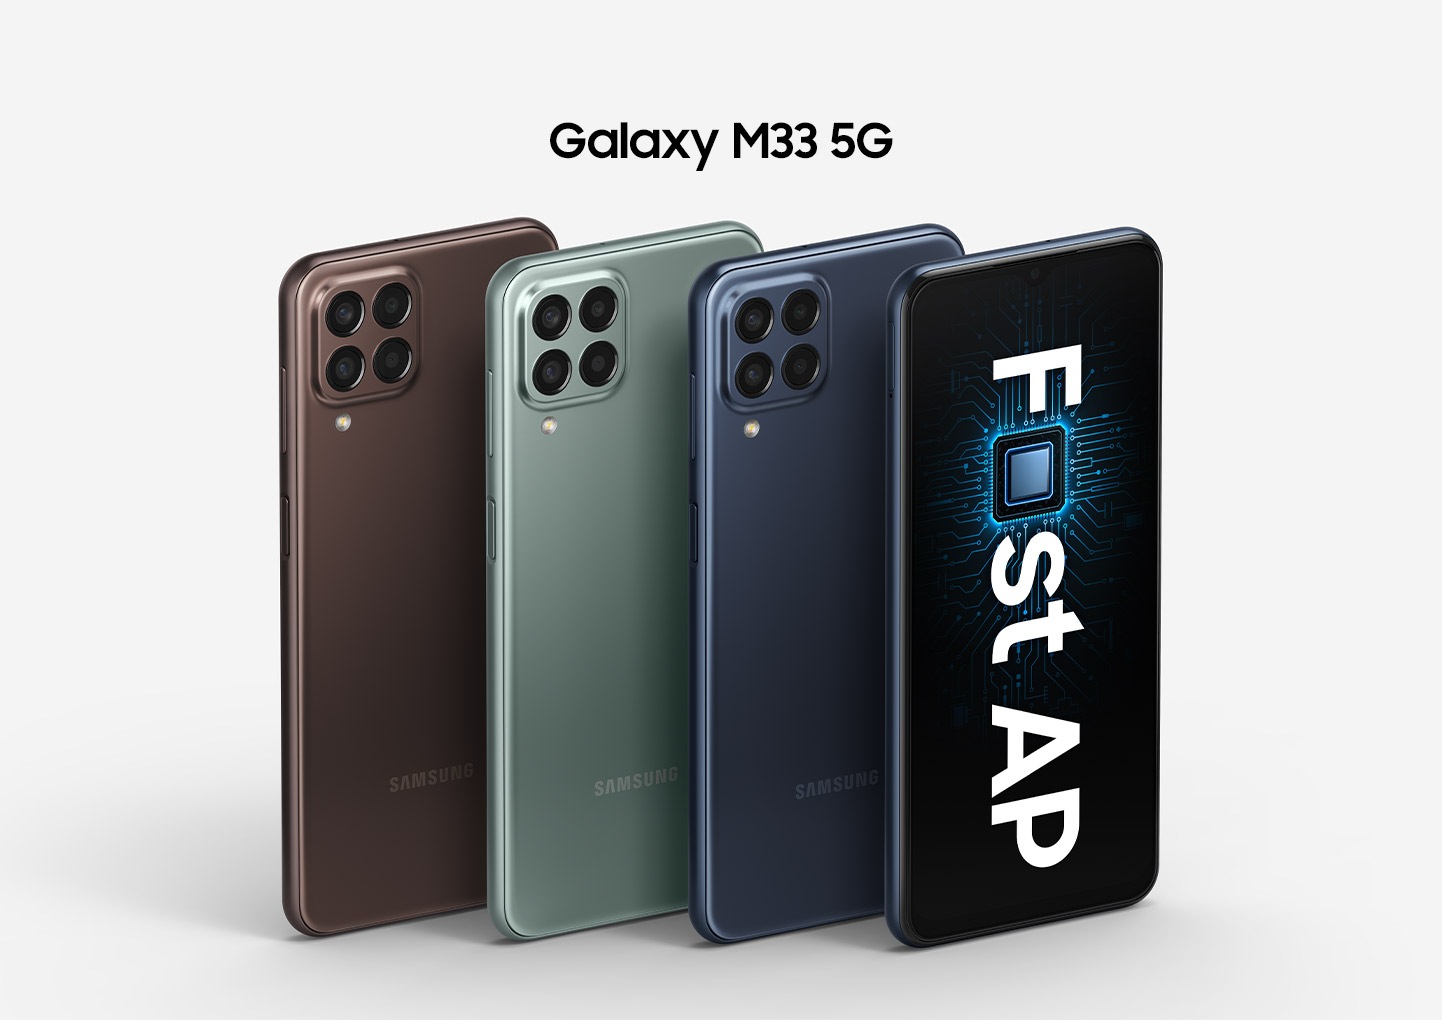 See Galaxy M33 5G, the latest cell phone's release dates, specs, price and price list. A phone with a Triple Camera and a 5,000mAh battery. Four Galaxy M33 5G devices, three of them show in Brown, Green and Blue. The other one shows a front